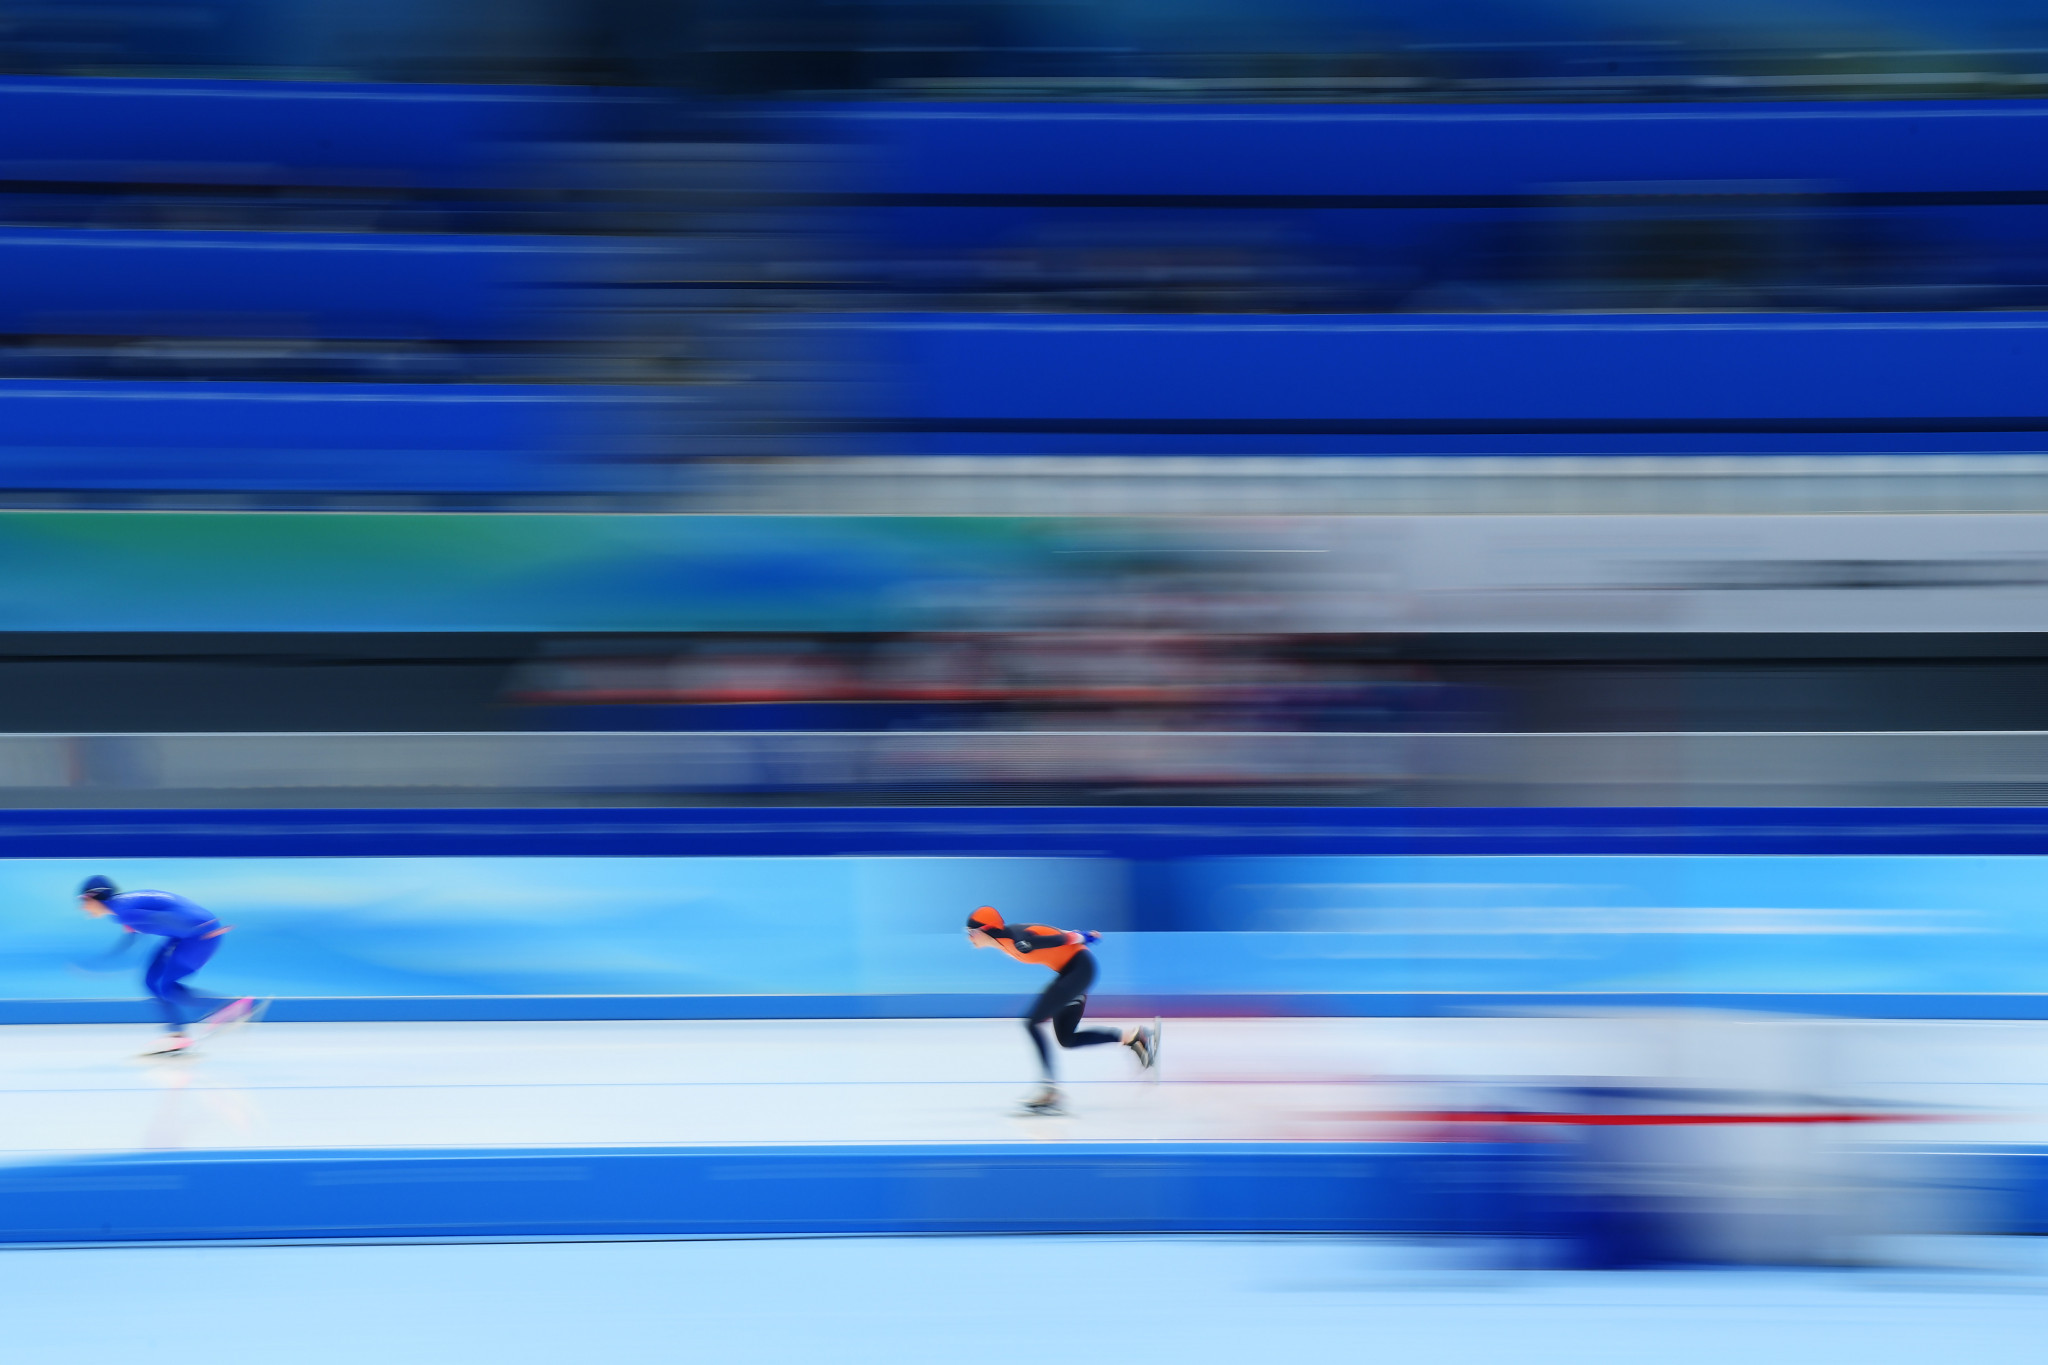 Irene Schouten of the Netherlands earned gold in the women's 1500 metres speed skating event today, in an Olympic record time ©Getty Images  